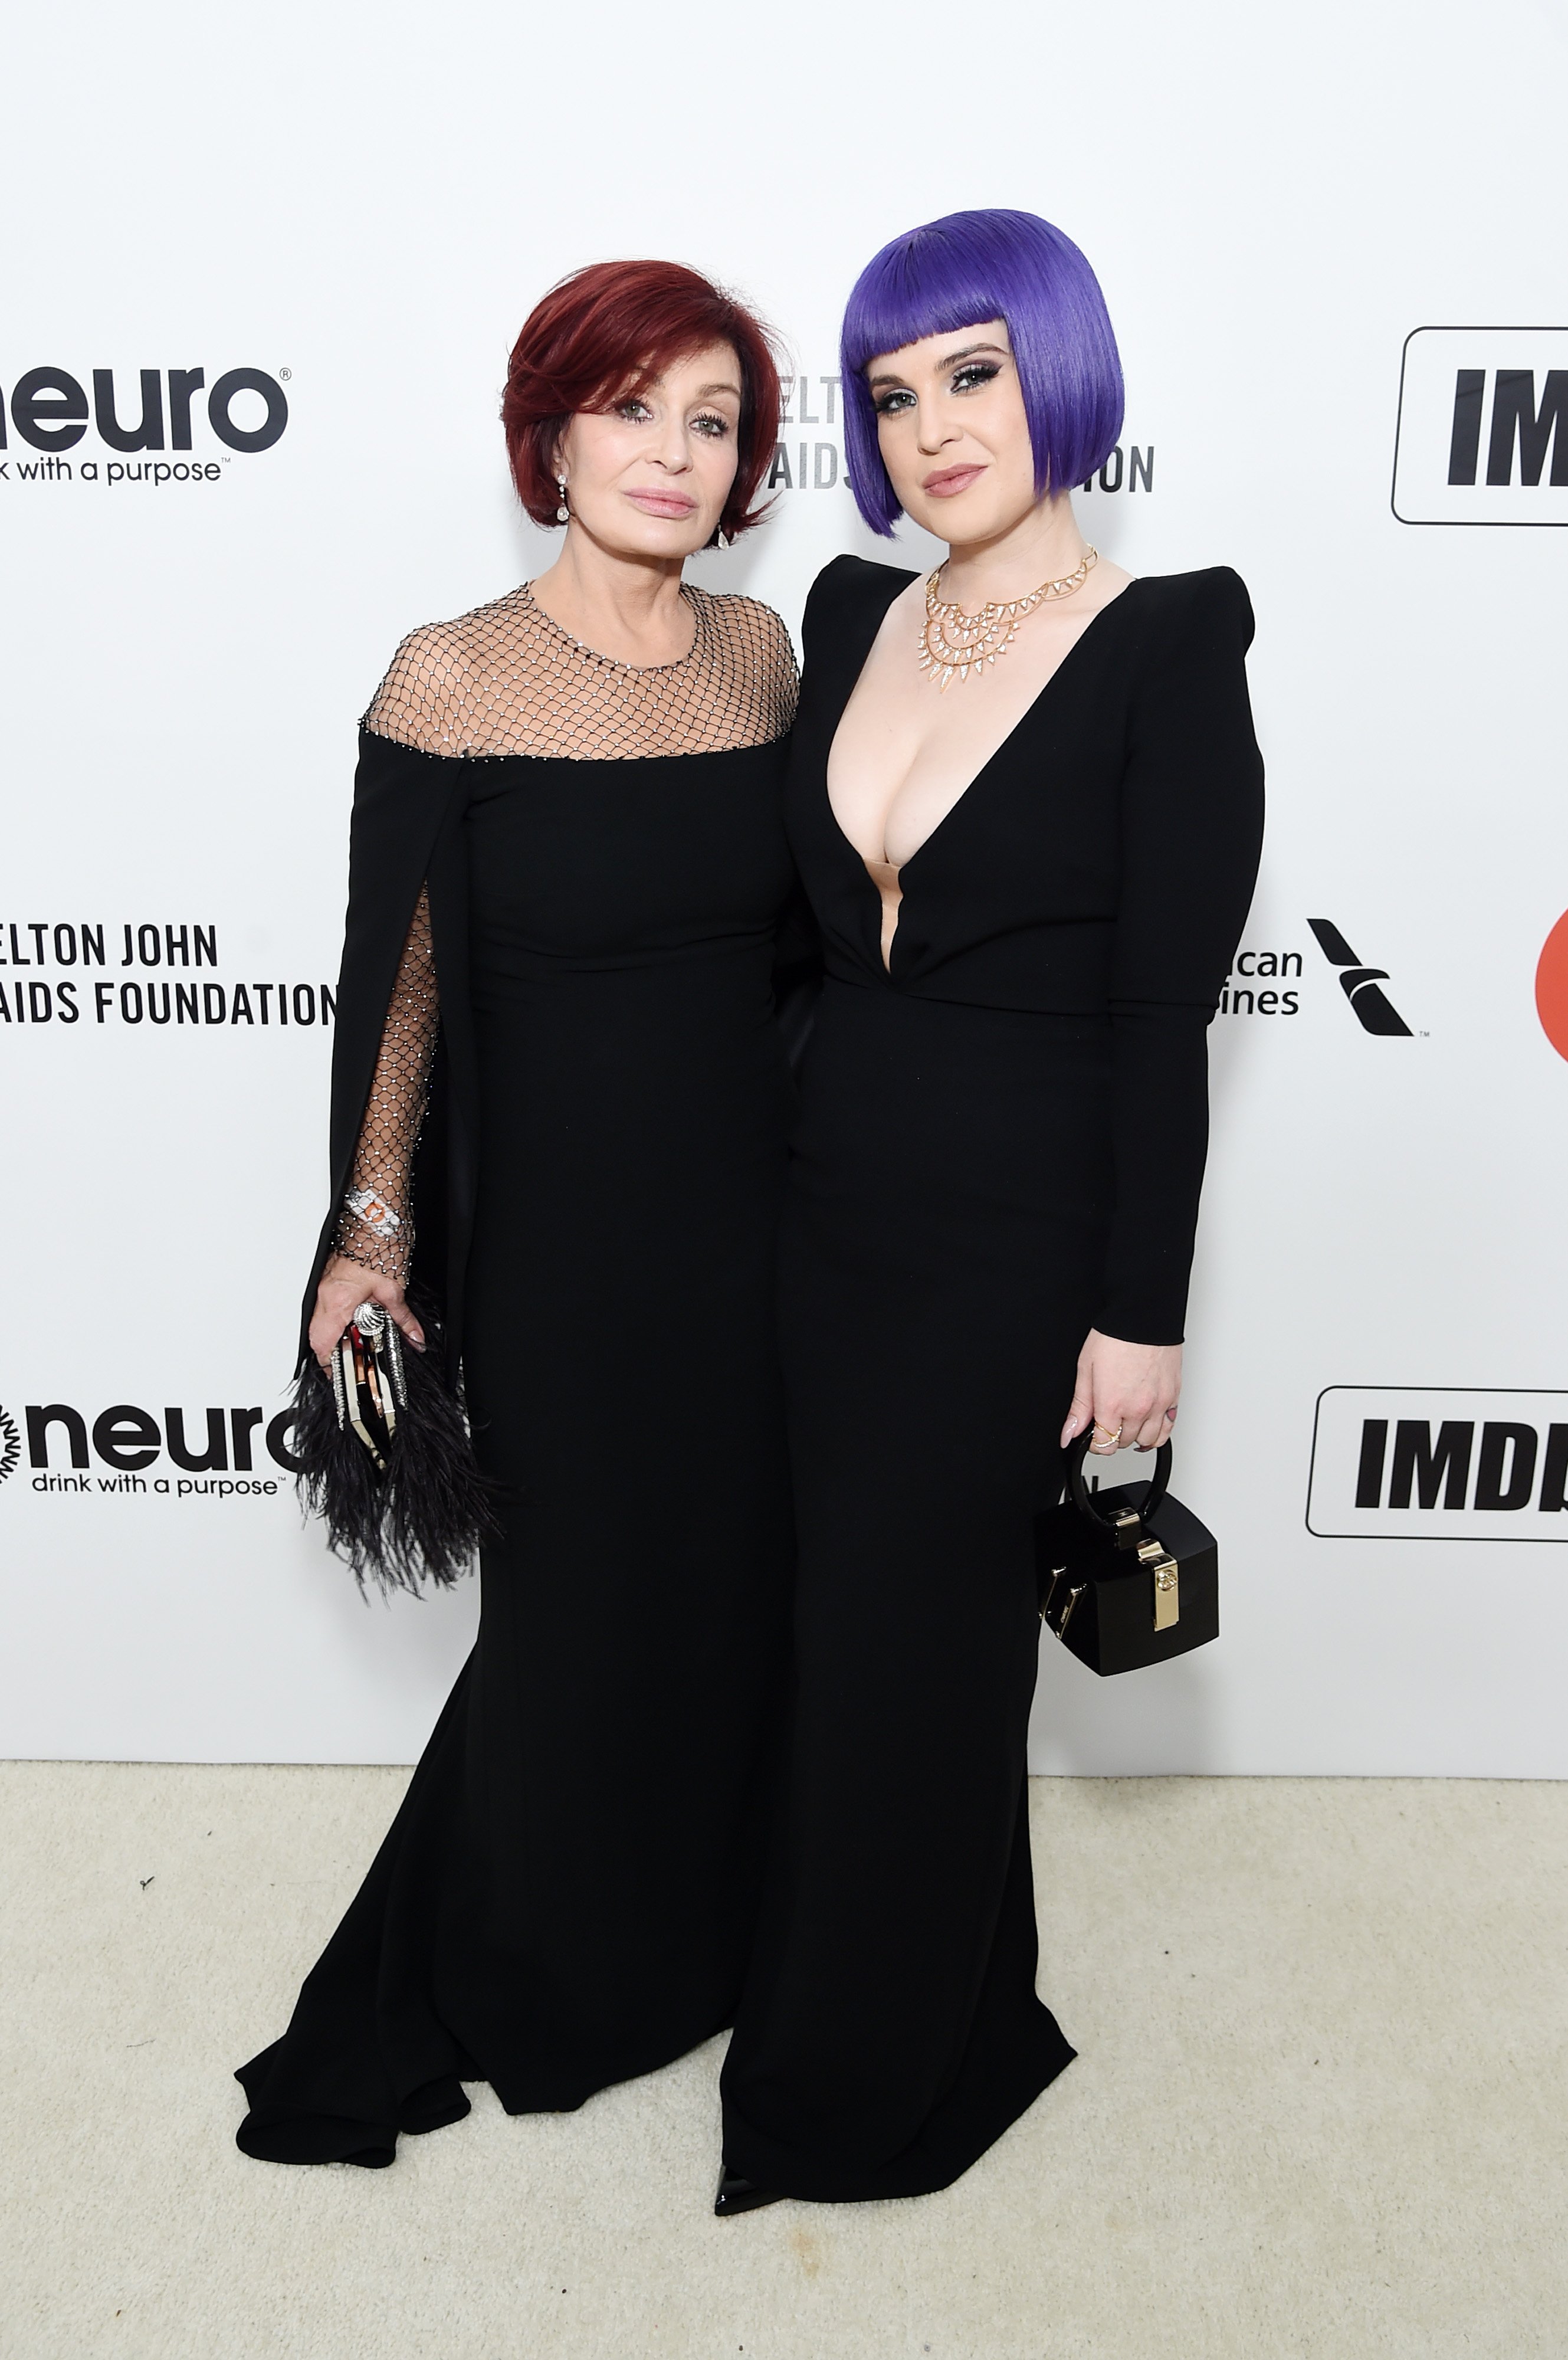 Sharon Osbourne and Kelly Osbourne on February 09, 2020 in West Hollywood, California. | Source: Getty Images